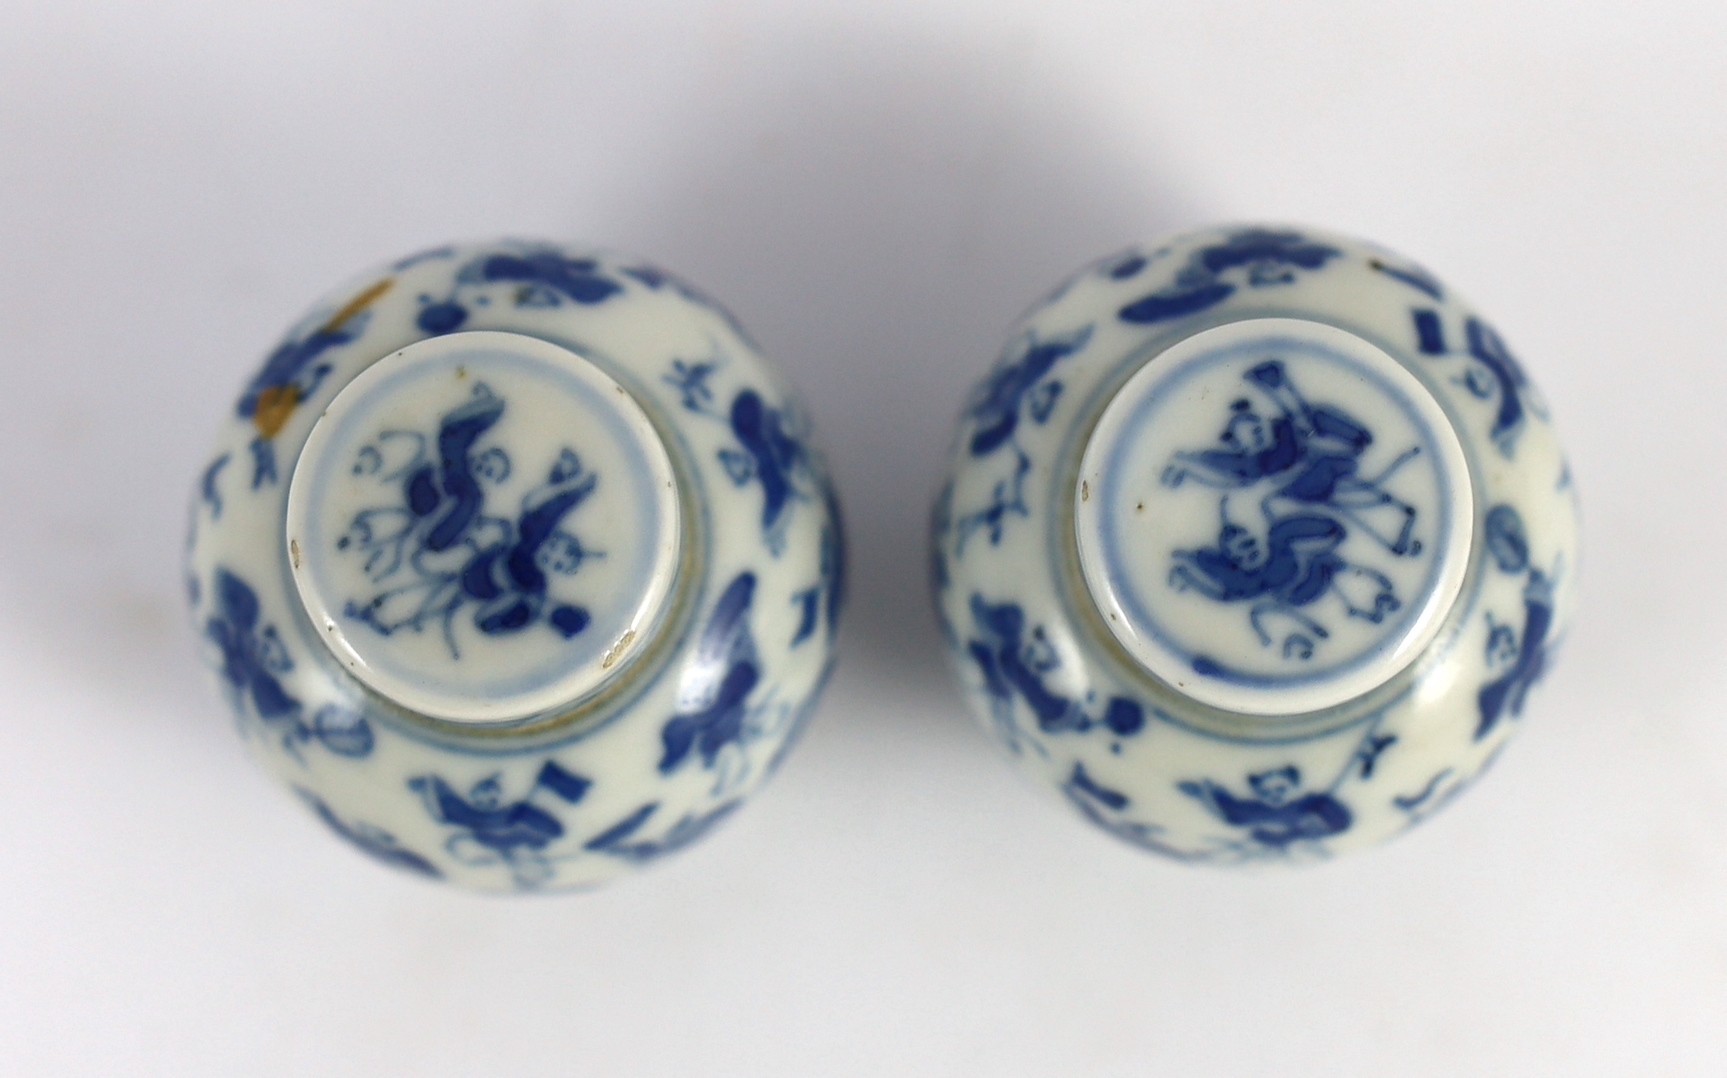 A pair of 19th century Chinese blue and white boys miniature jars and covers, 5.5 cm high - Image 3 of 5